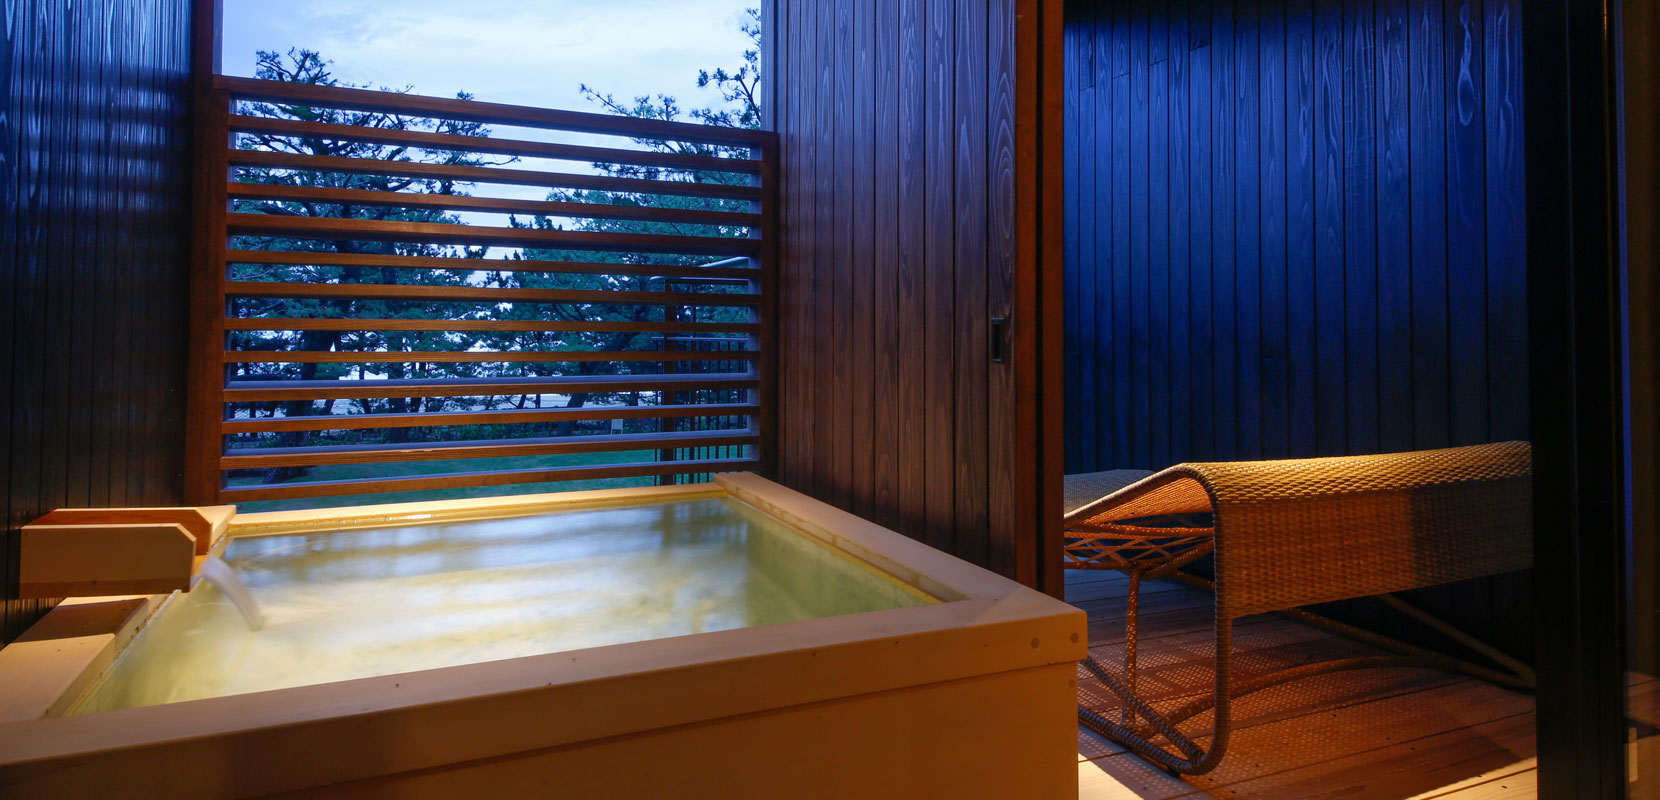 All rooms furnished with open-air baths